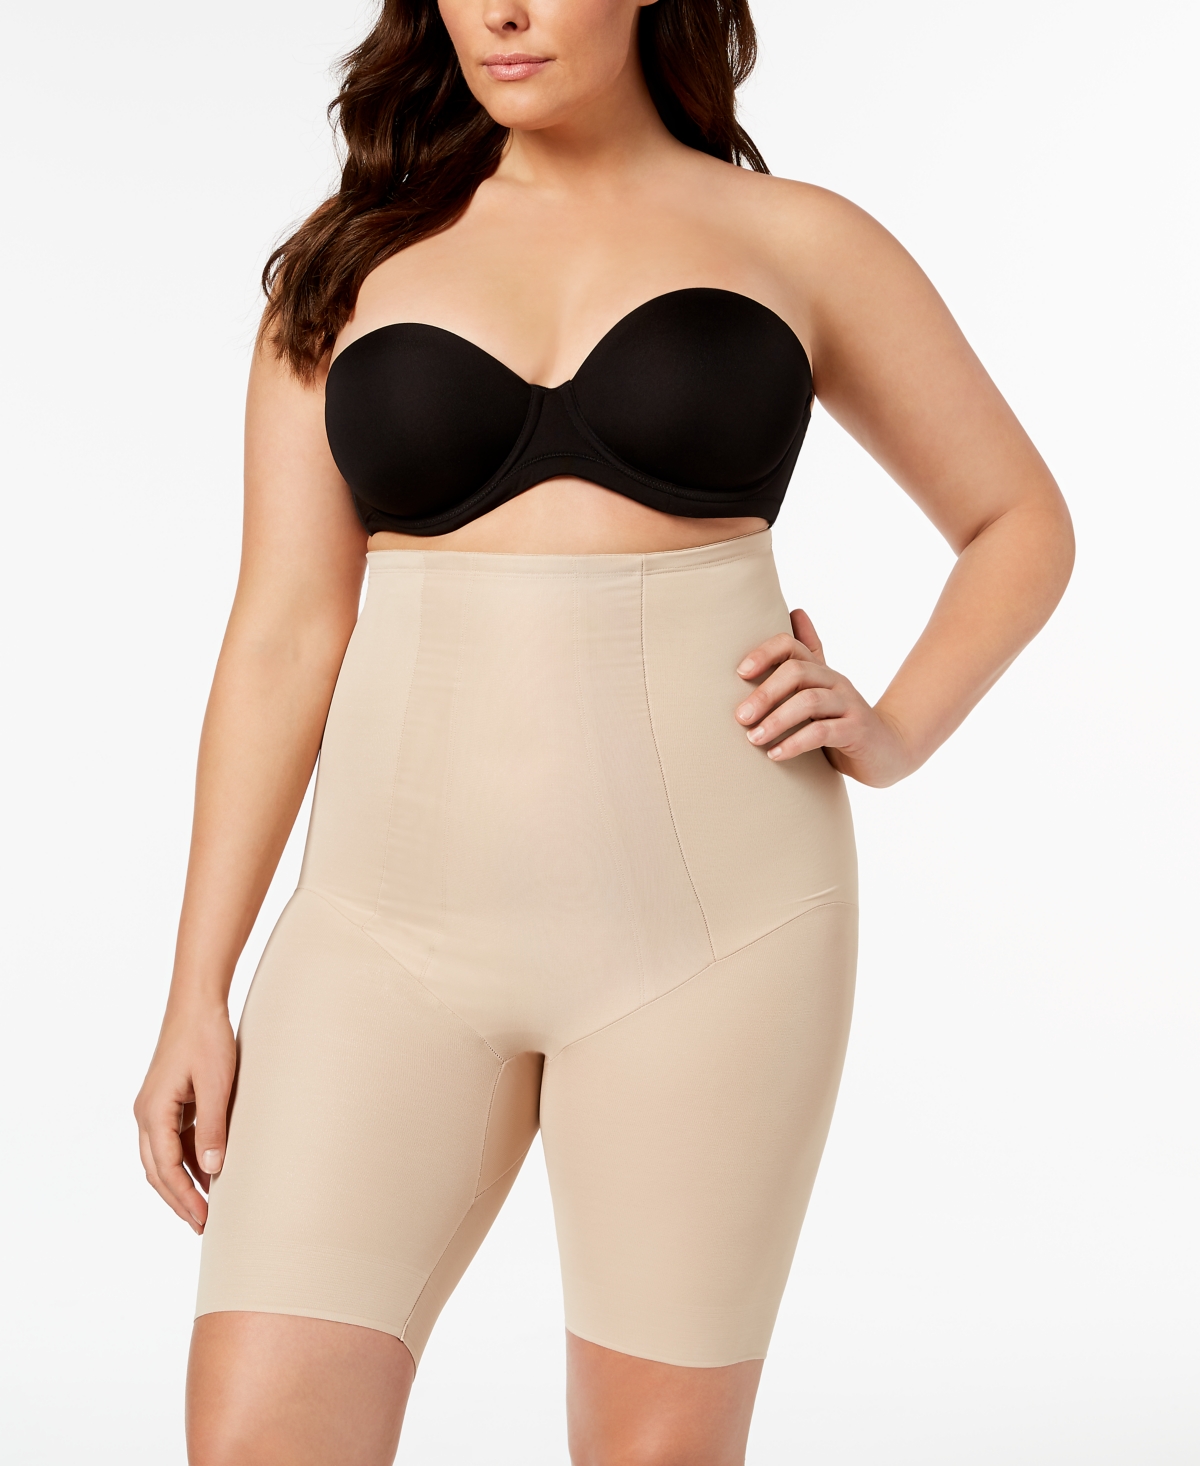 UPC 080225103229 product image for Miraclesuit Extra Firm Tummy-Control High Waist Thigh Slimmer 2709 | upcitemdb.com